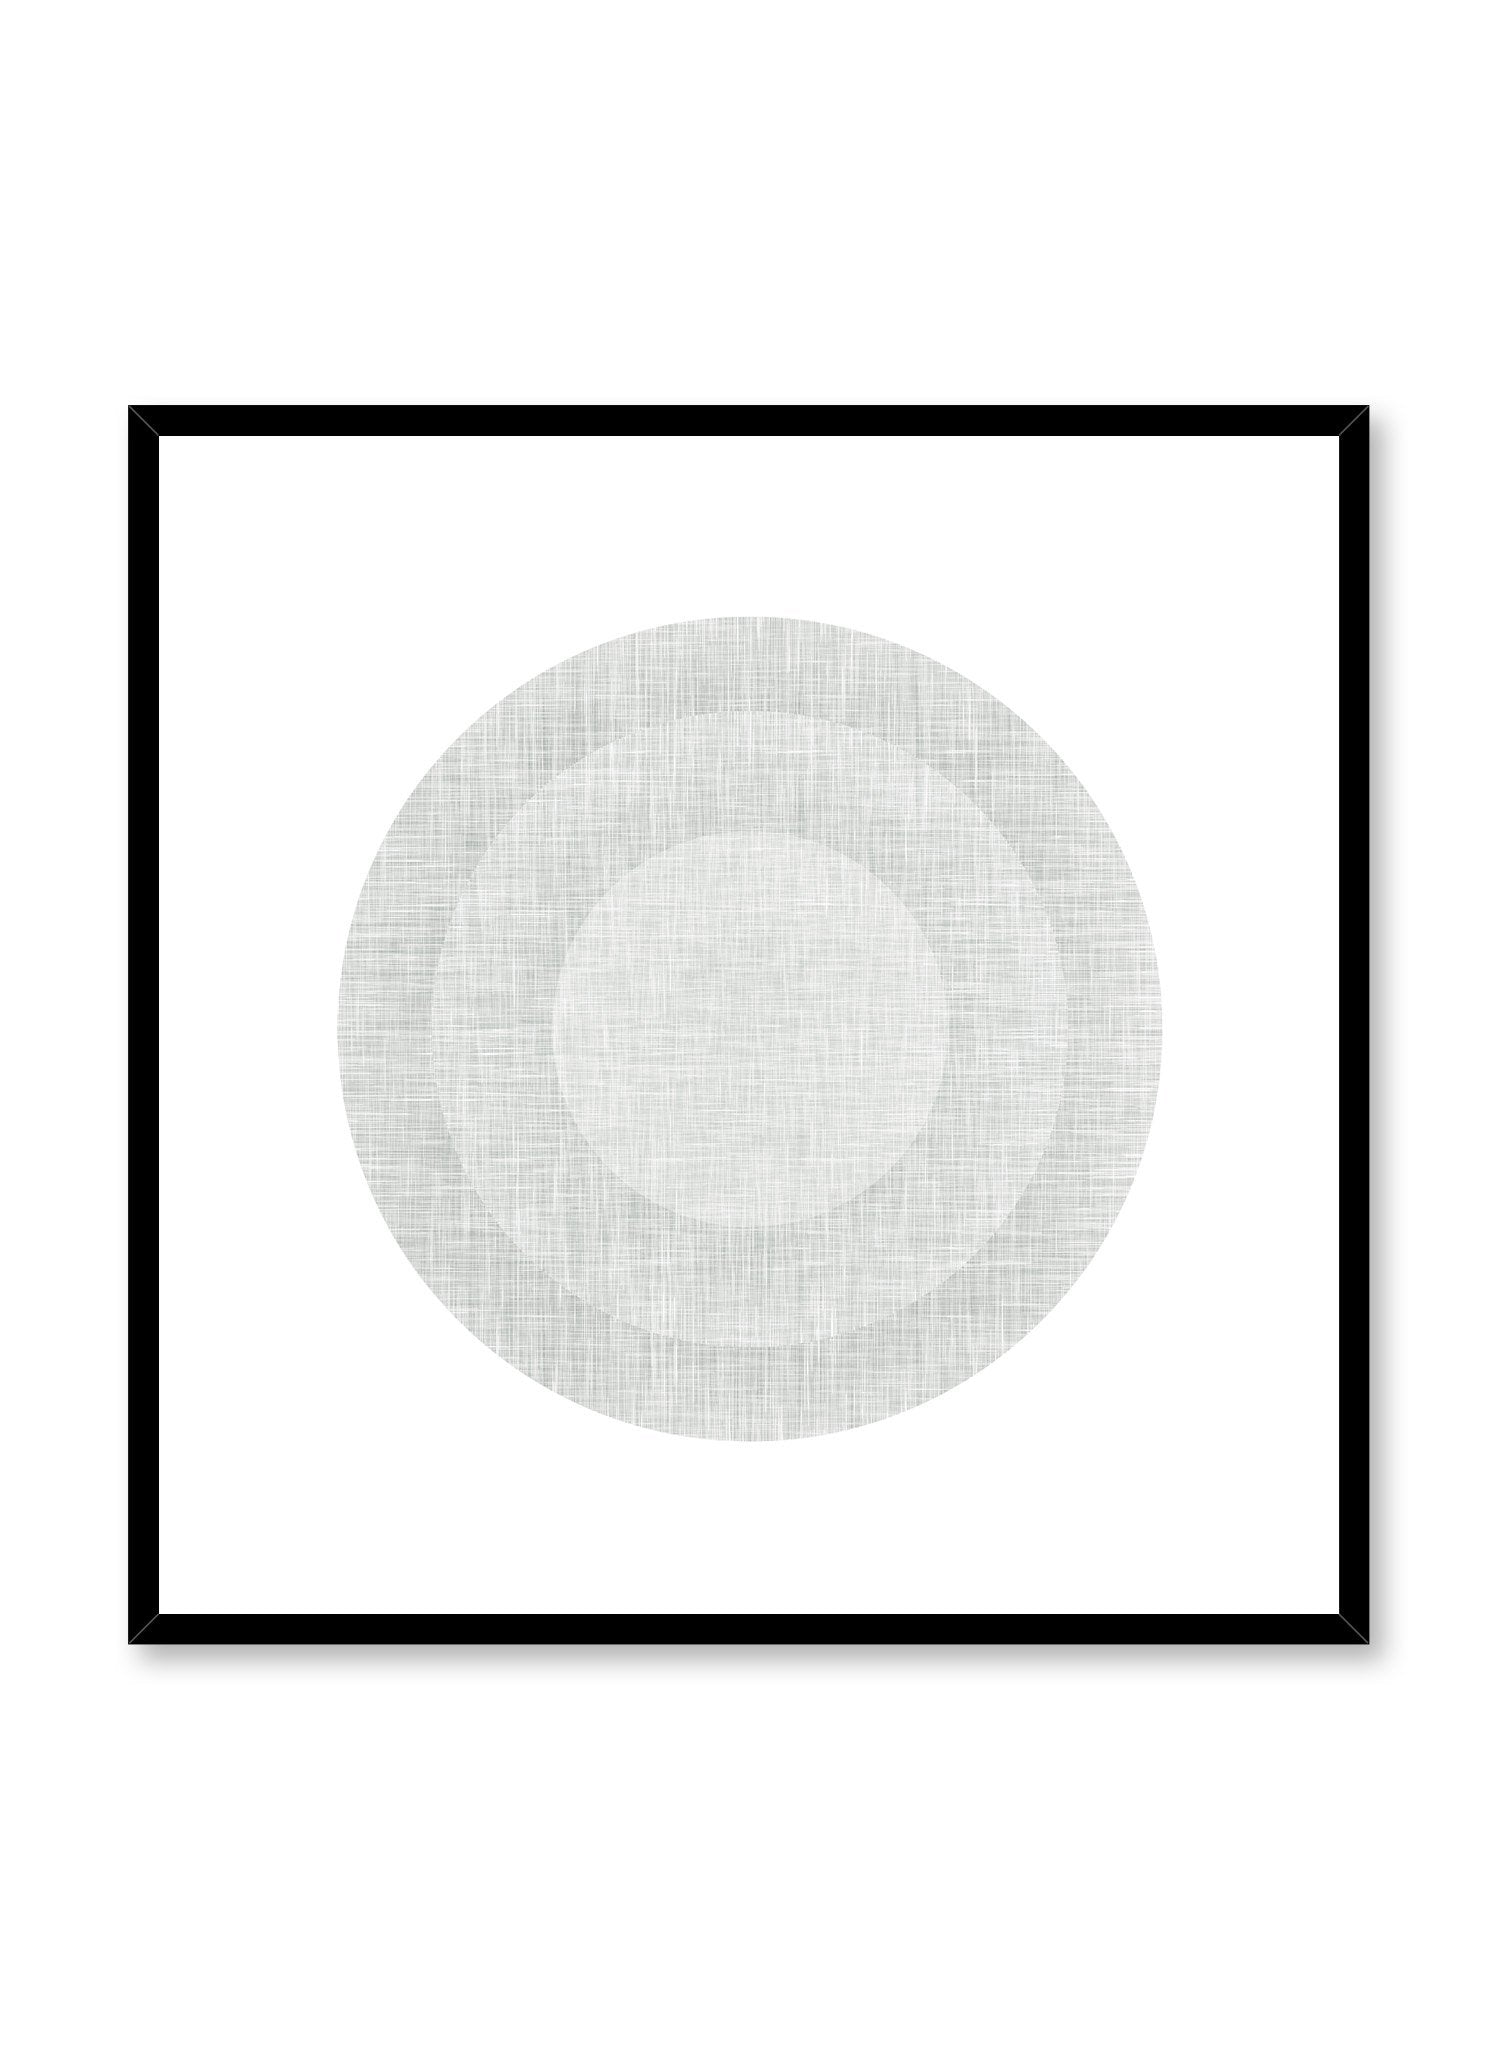 Minimalist design square poster by Opposite Wall with abstract grey circles in target shape